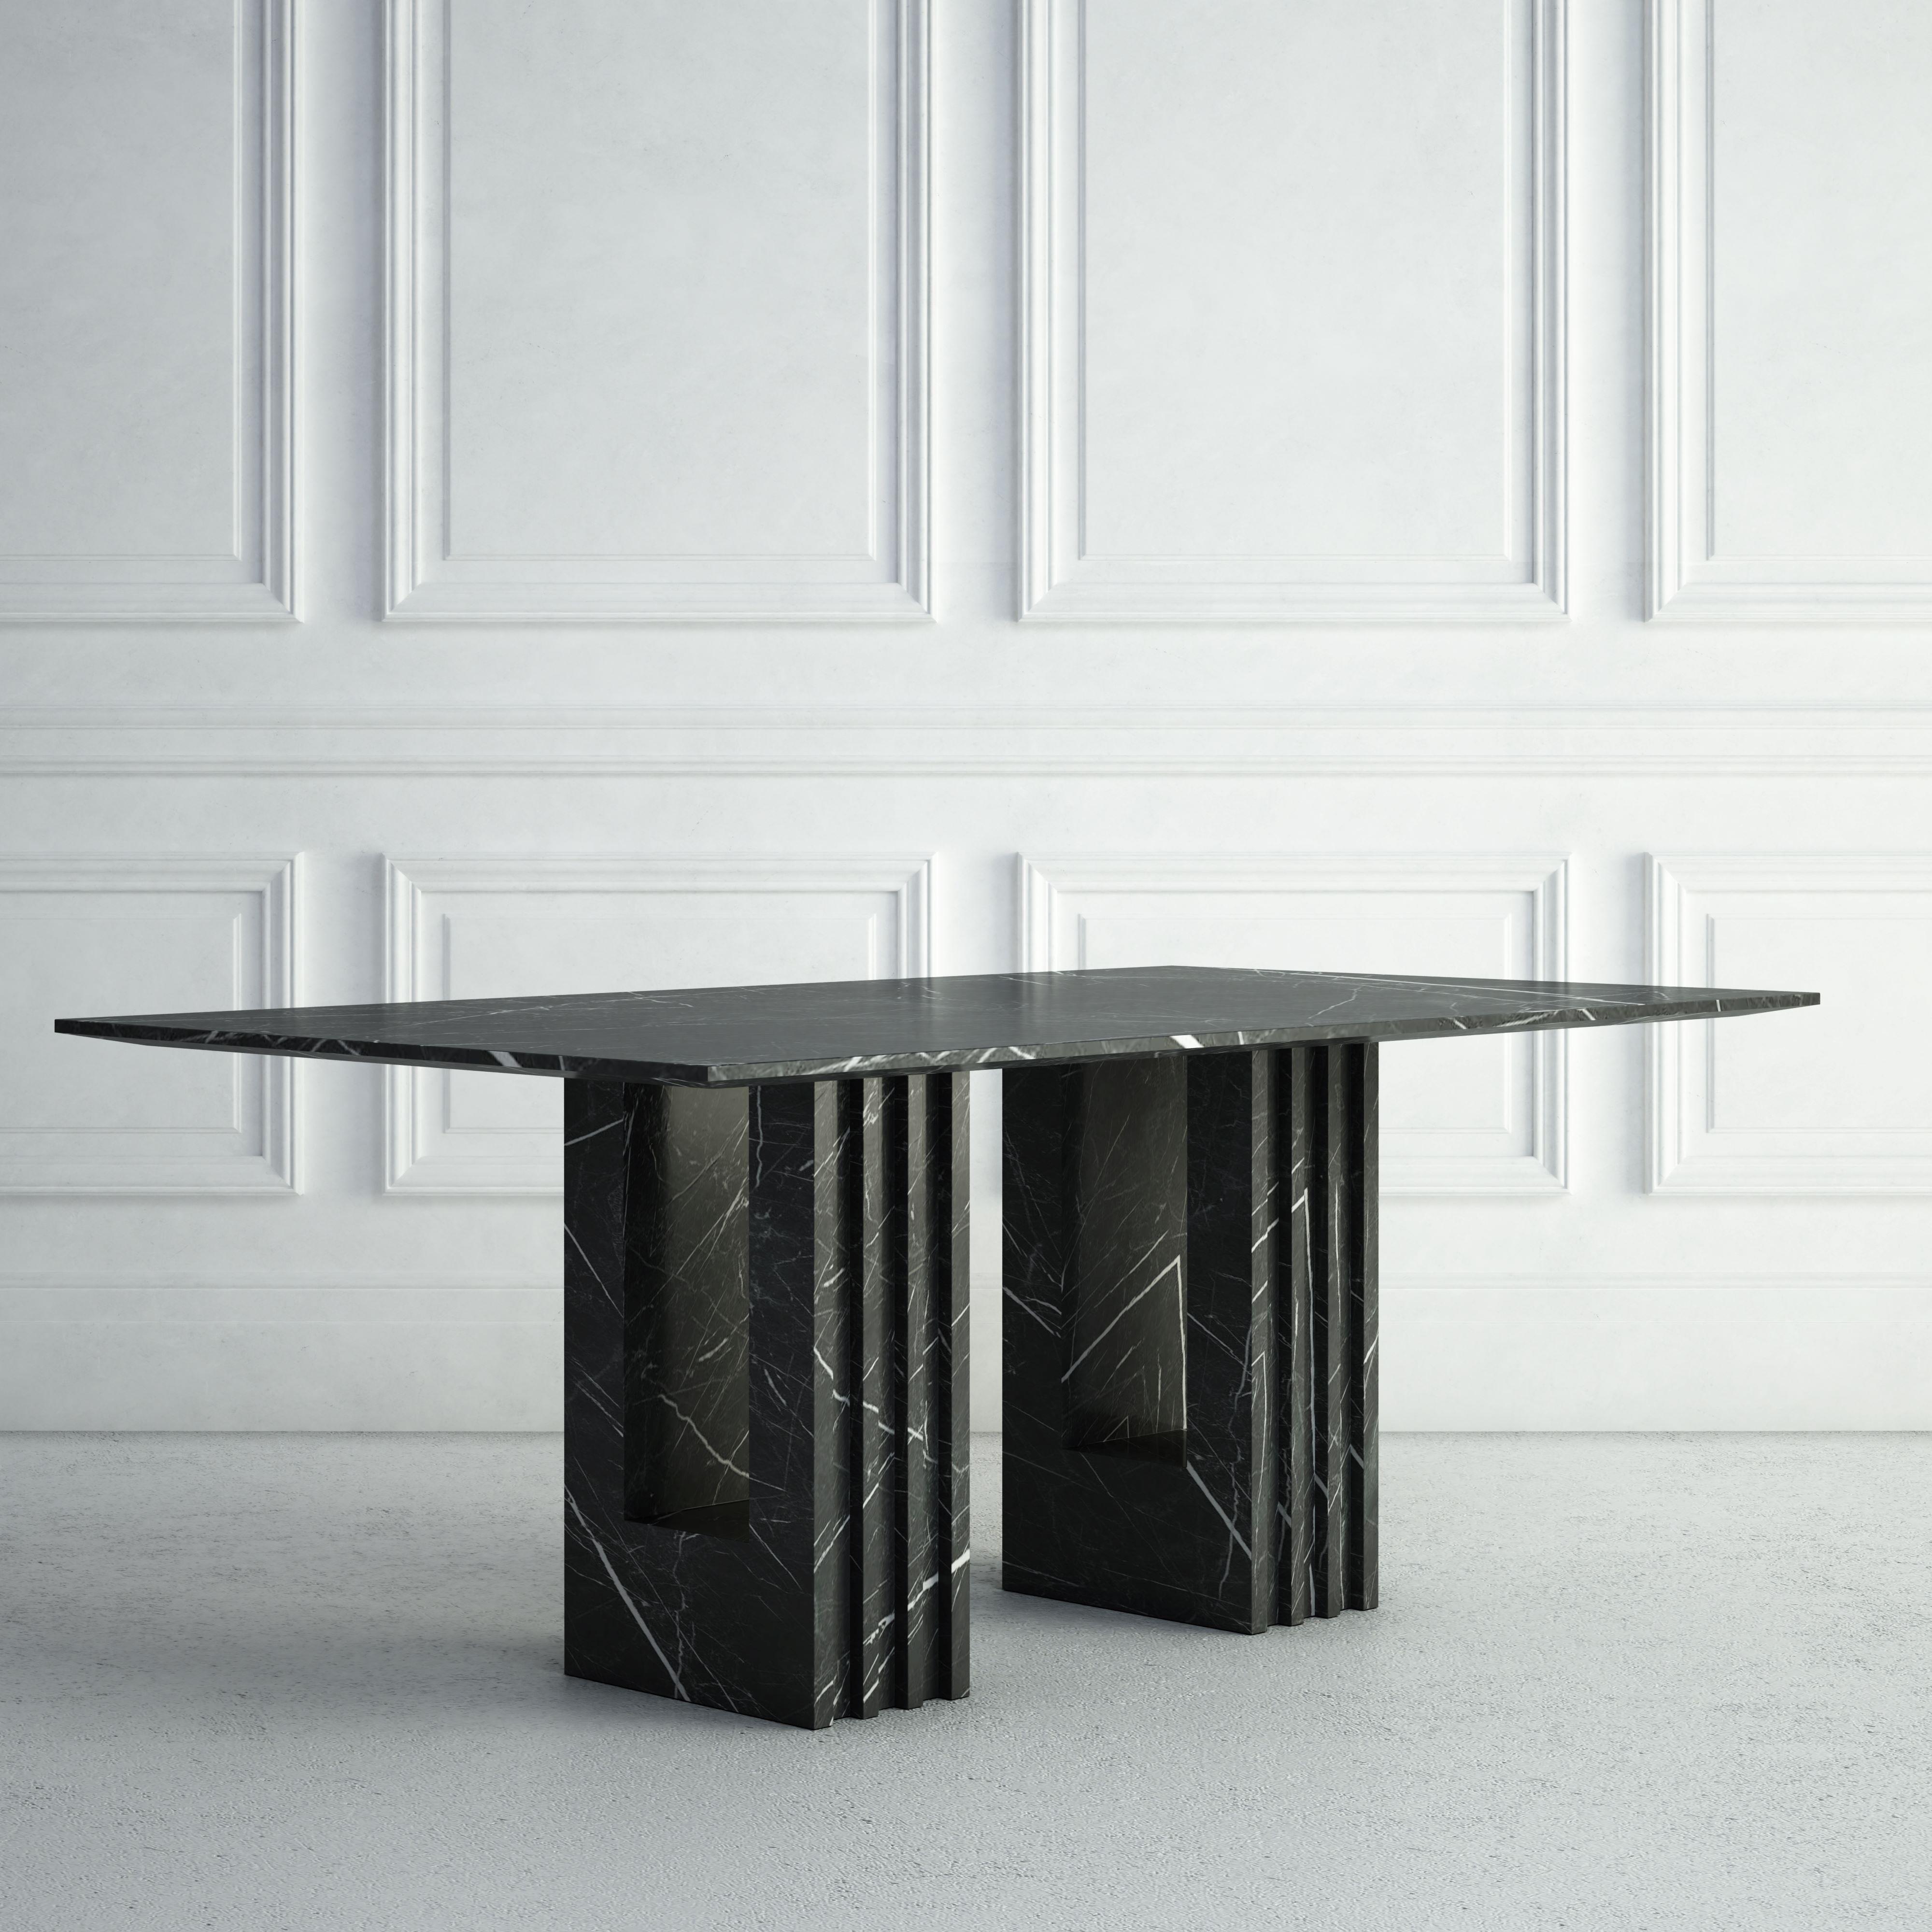 The Madeleine is a sleek modern dining table.  The top is made from an elegant thin rectangular stone slab.  Each of the two legs are also rectangular, but feature fluting on the outward-facing sides, along with a smaller rectangular cut-out through